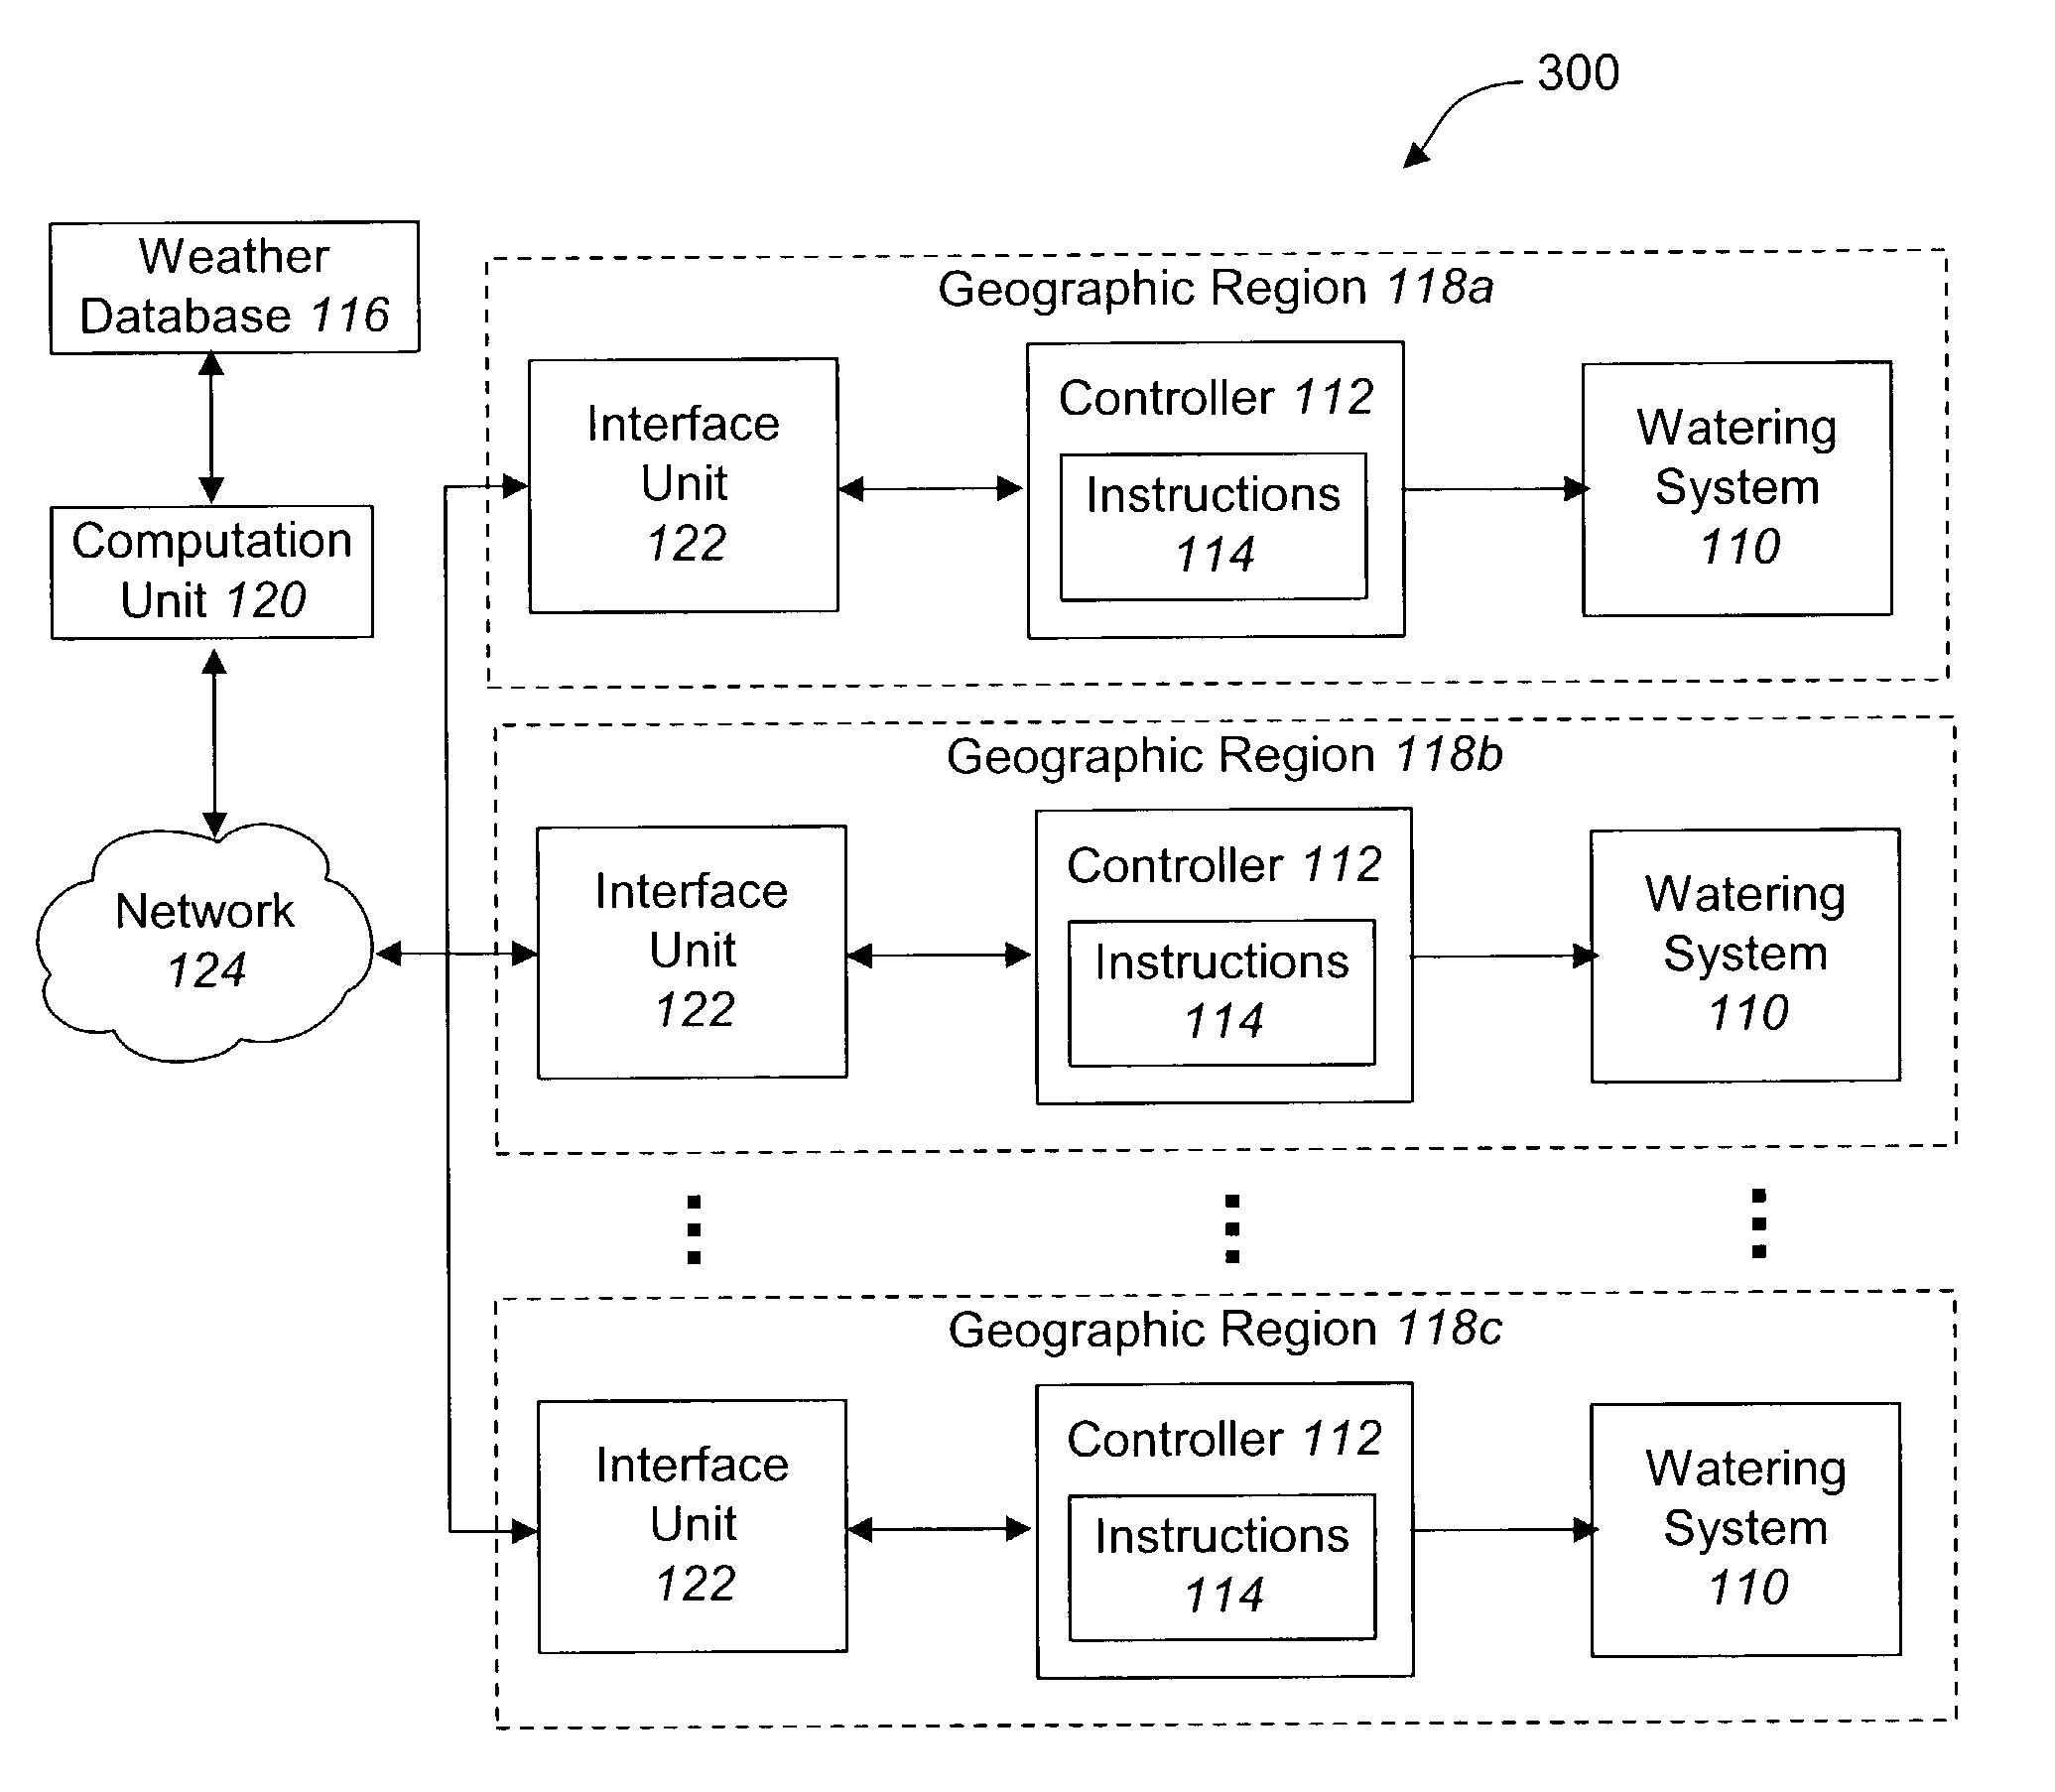 Systems and methods for optimizing the efficiency of a watering system through use of a computer network